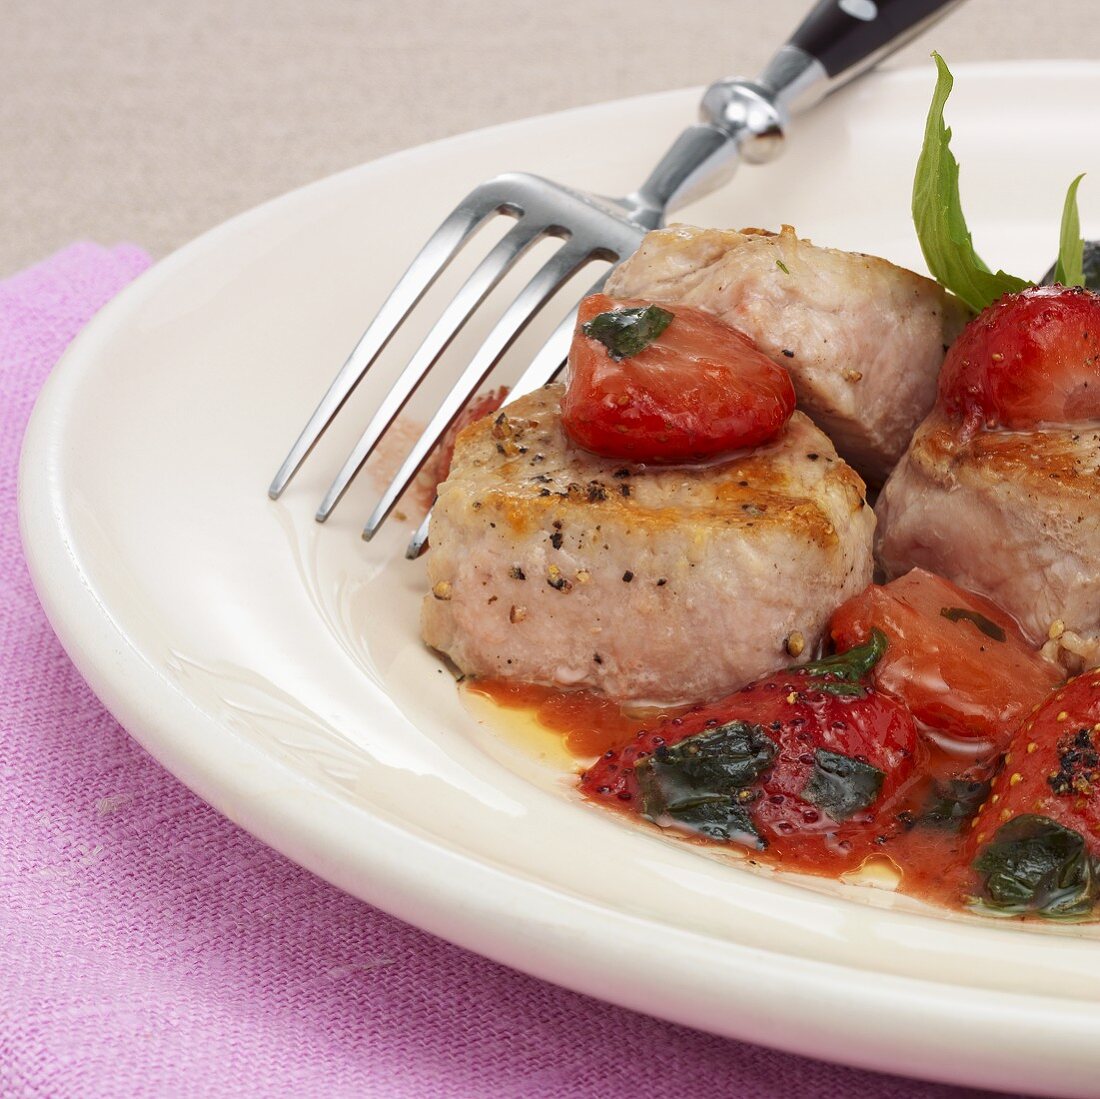 Veal medallions with strawberries in pastis